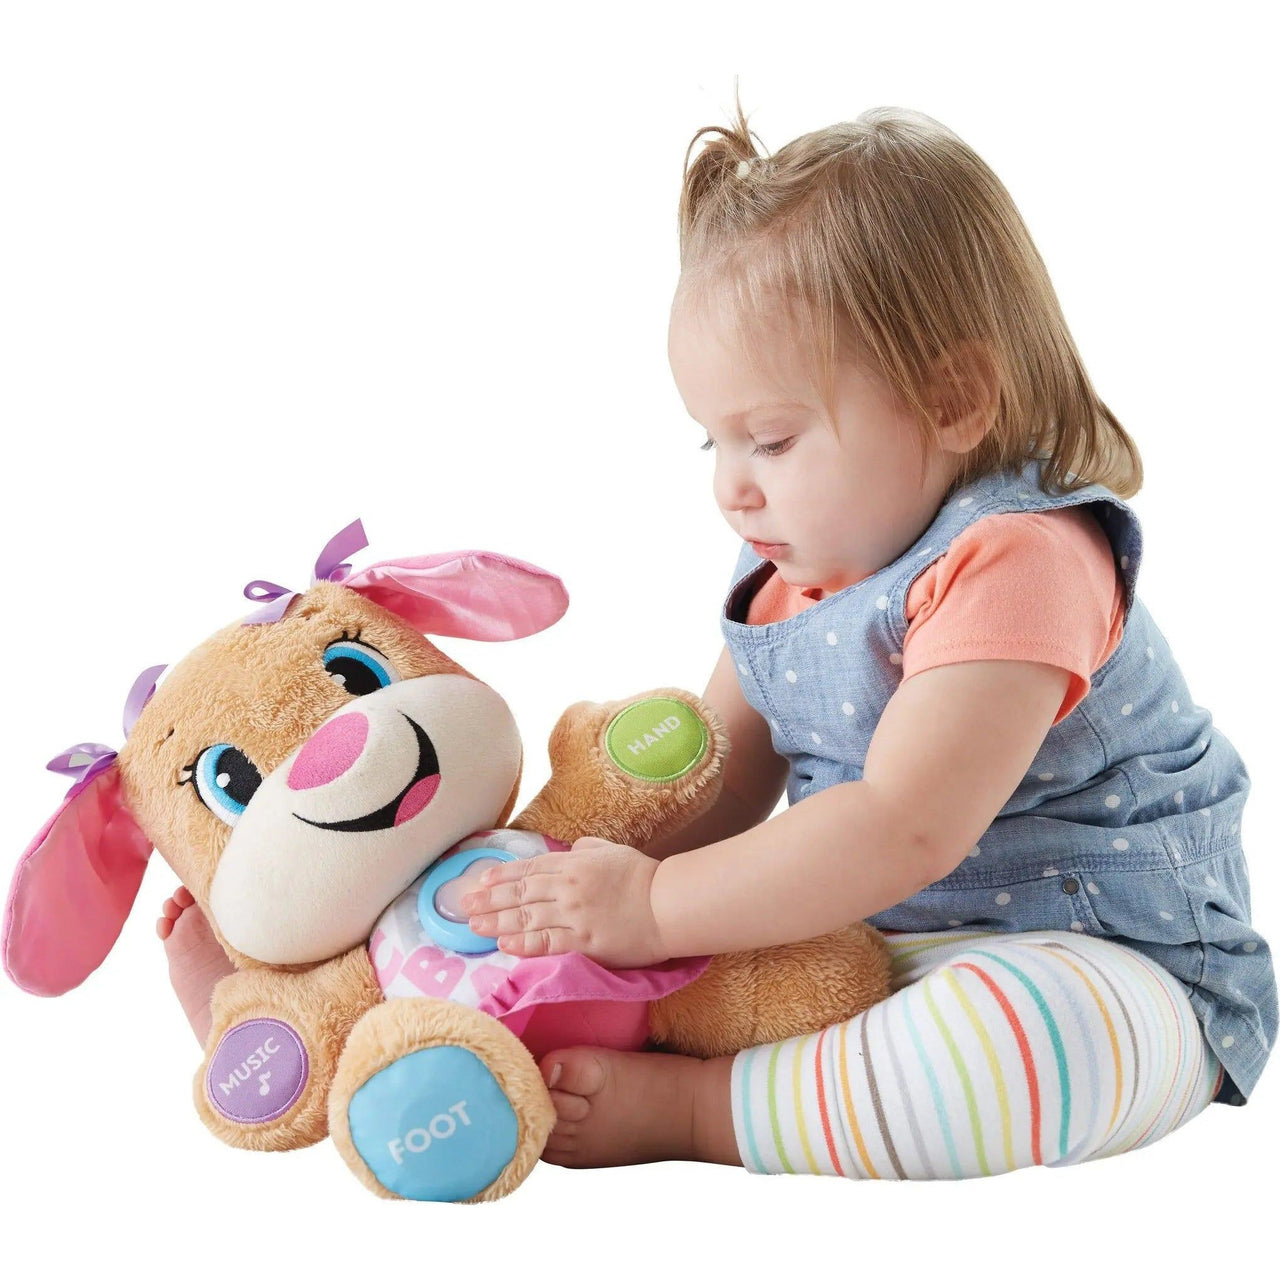 Fisher-Price Laugh & Learn Smart Stages First Words Sis Fisher-Price